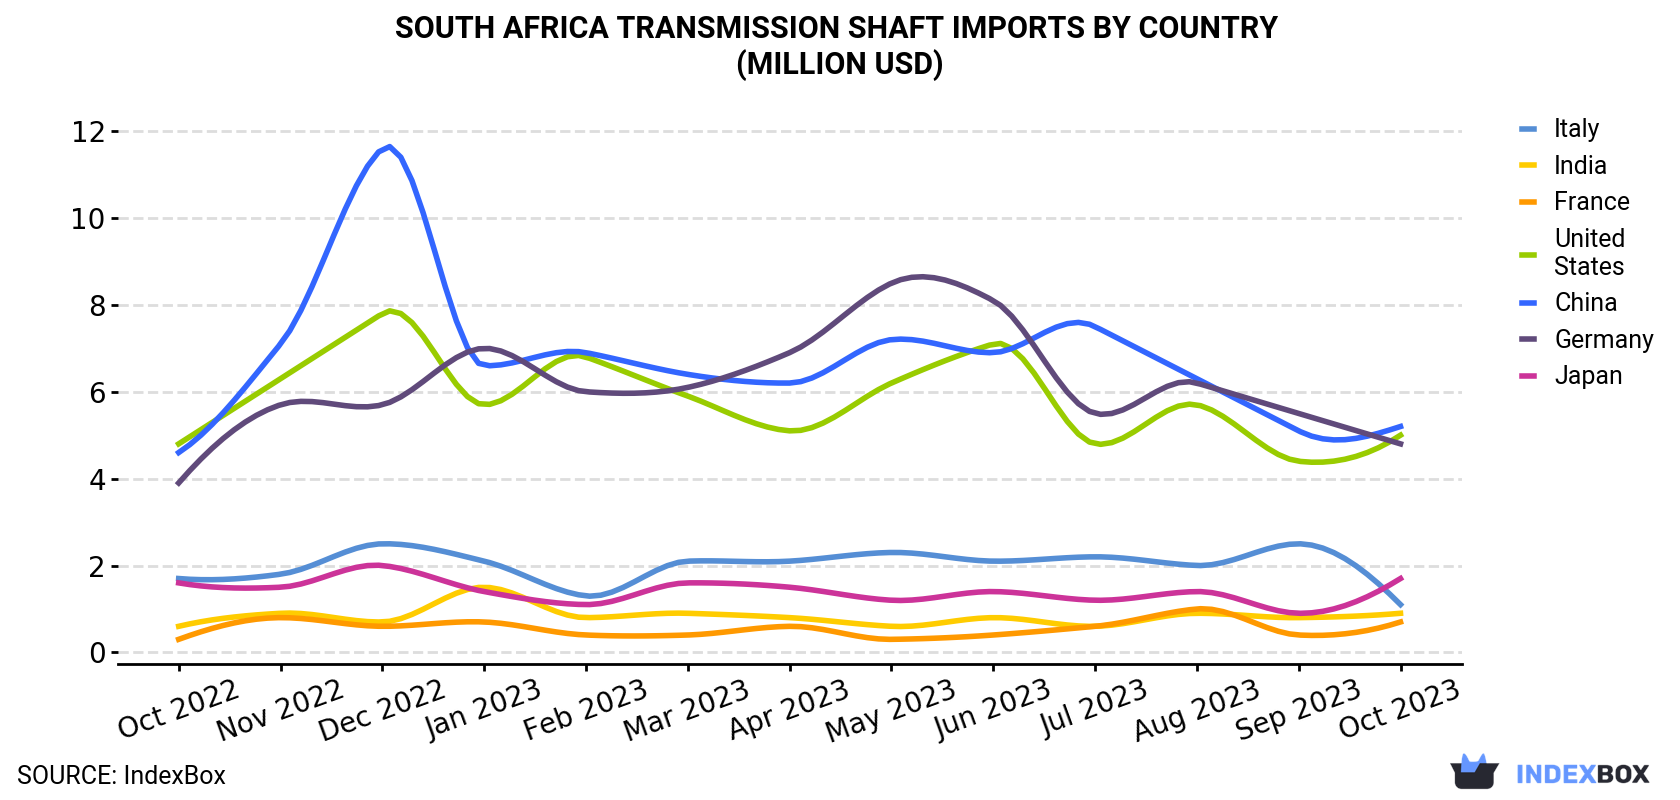 South Africa Transmission Shaft Imports By Country (Million USD)